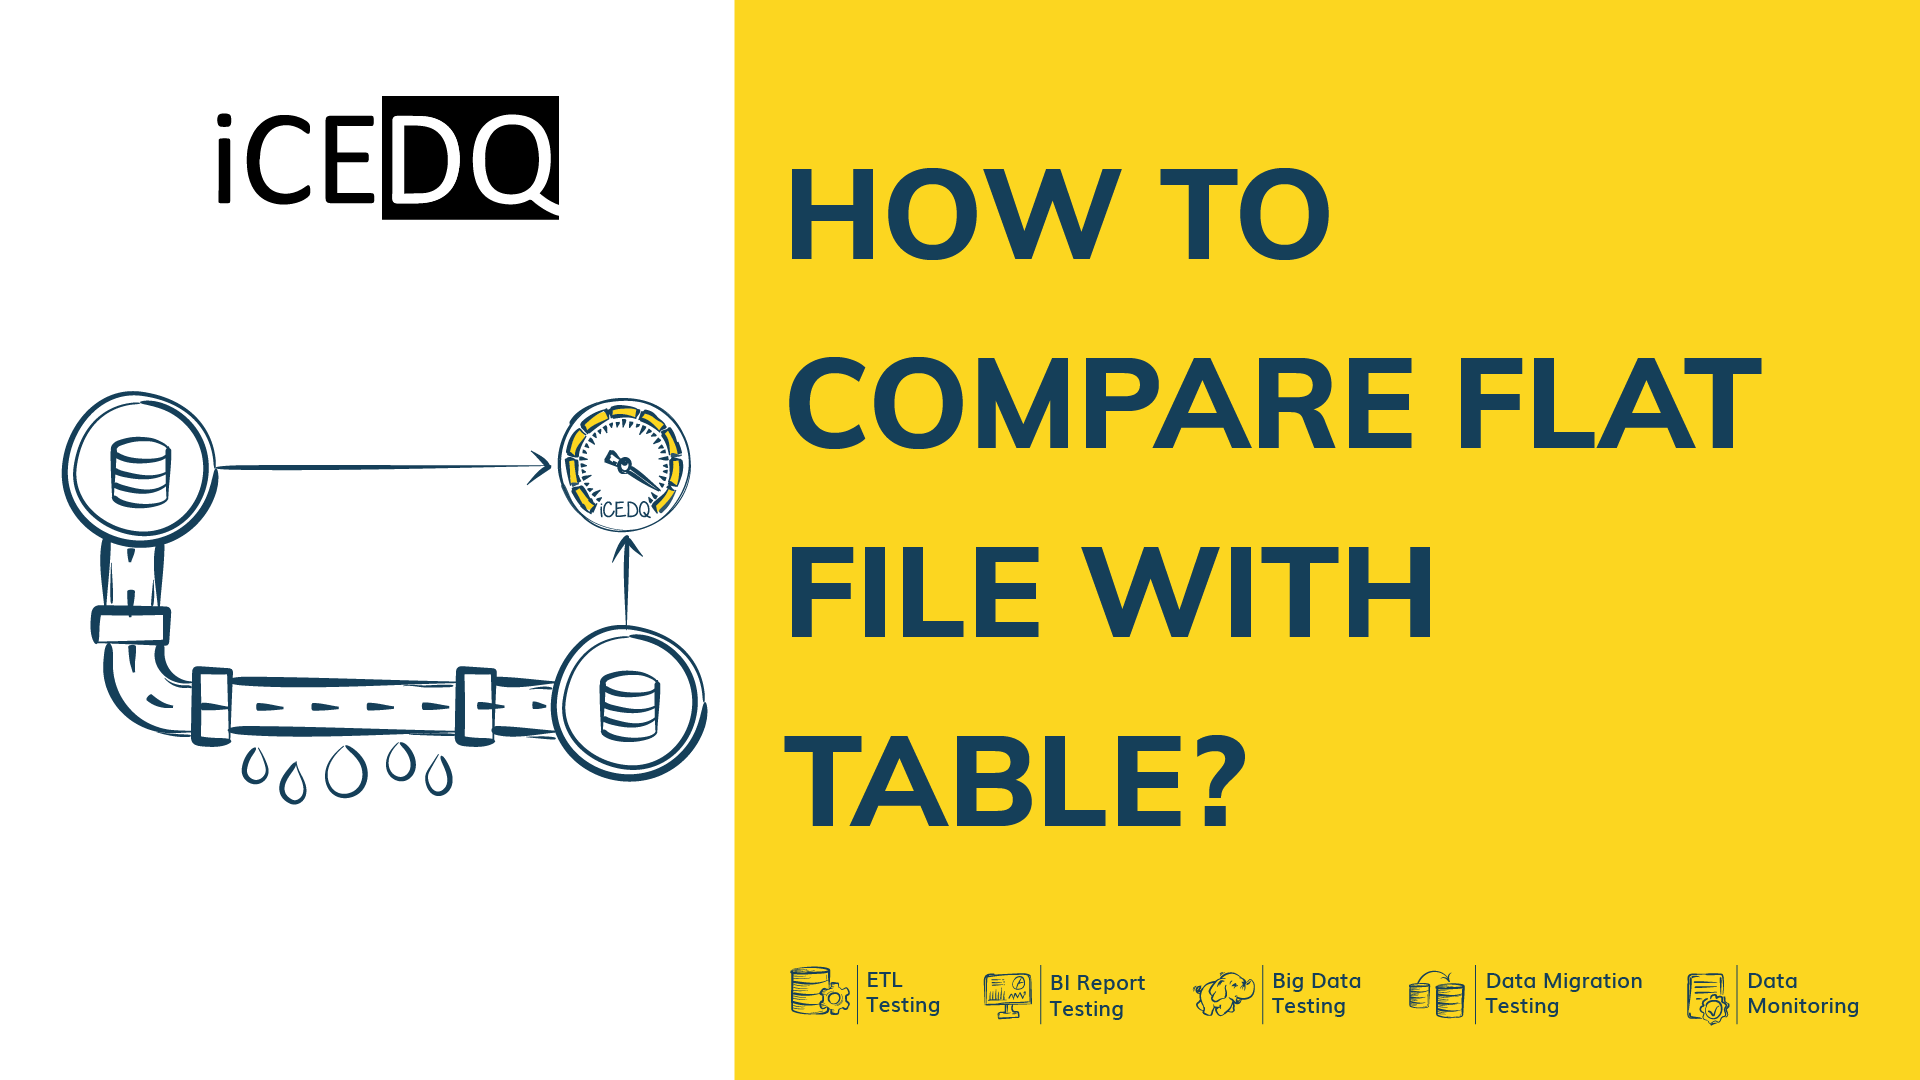 How to Compare Flat File with Table using iceDQ?